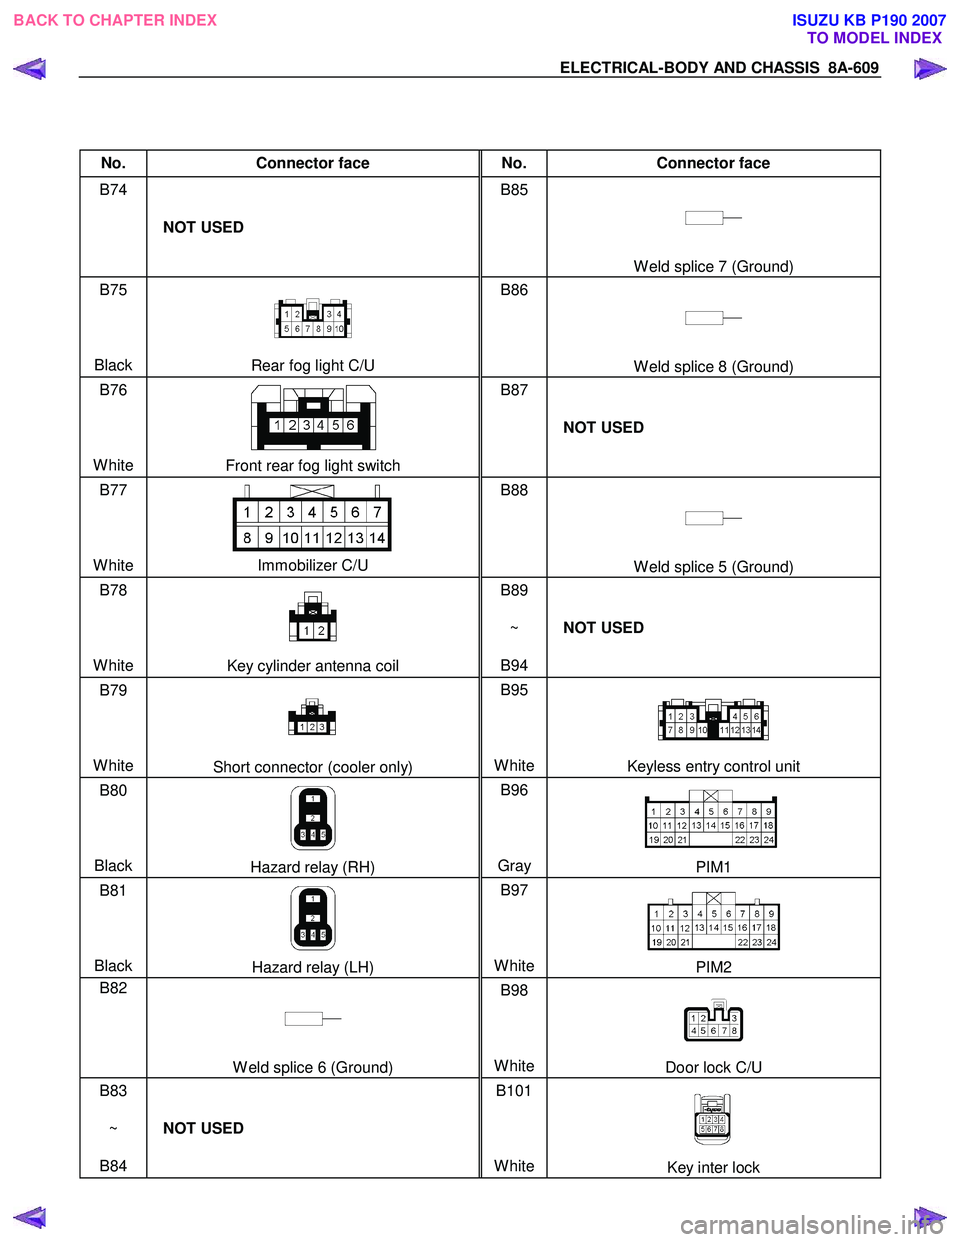 ISUZU KB P190 2007  Workshop Owners Manual ELECTRICAL-BODY AND CHASSIS  8A-609 
 
 
No. Connector face  No. Connector face 
B74 
  
 
 
  NOT USED  B85 
 
 
 
 
W eld splice 7 (Ground) 
B75   
 
 
Black 
Rear fog light C/U  B86 
 
 
 
 W eld s